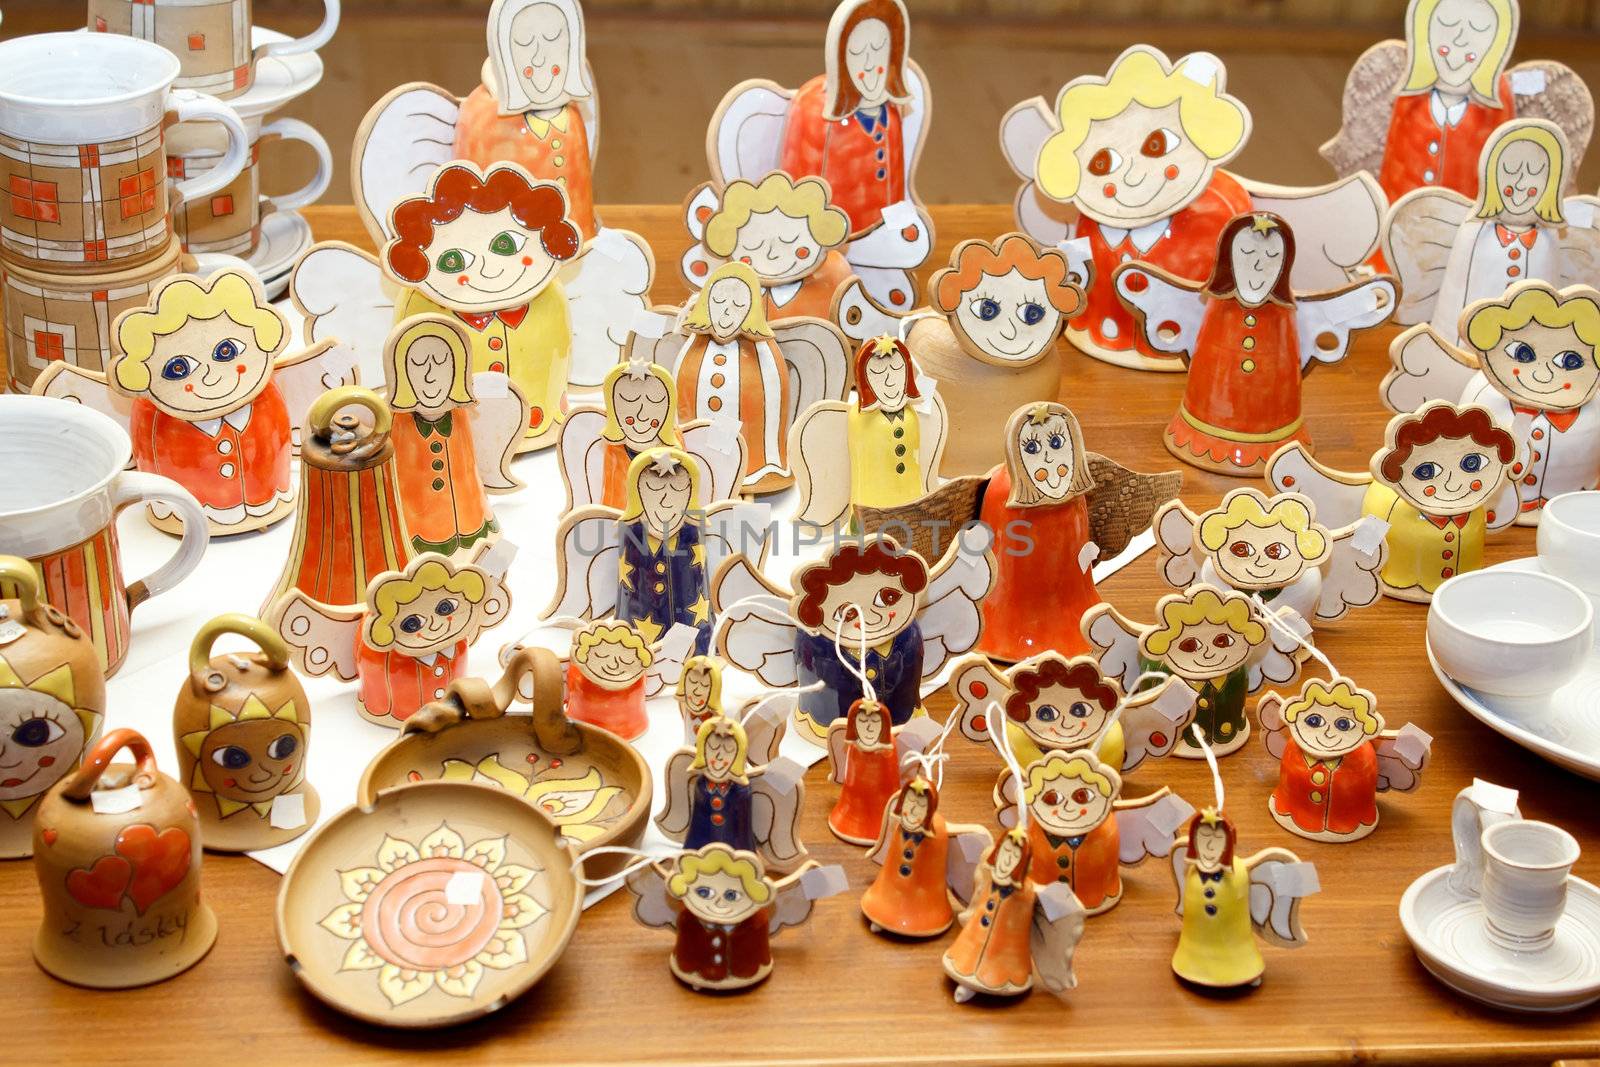 Hand-made ceramic Christmas decorations, angels and other figures by artush